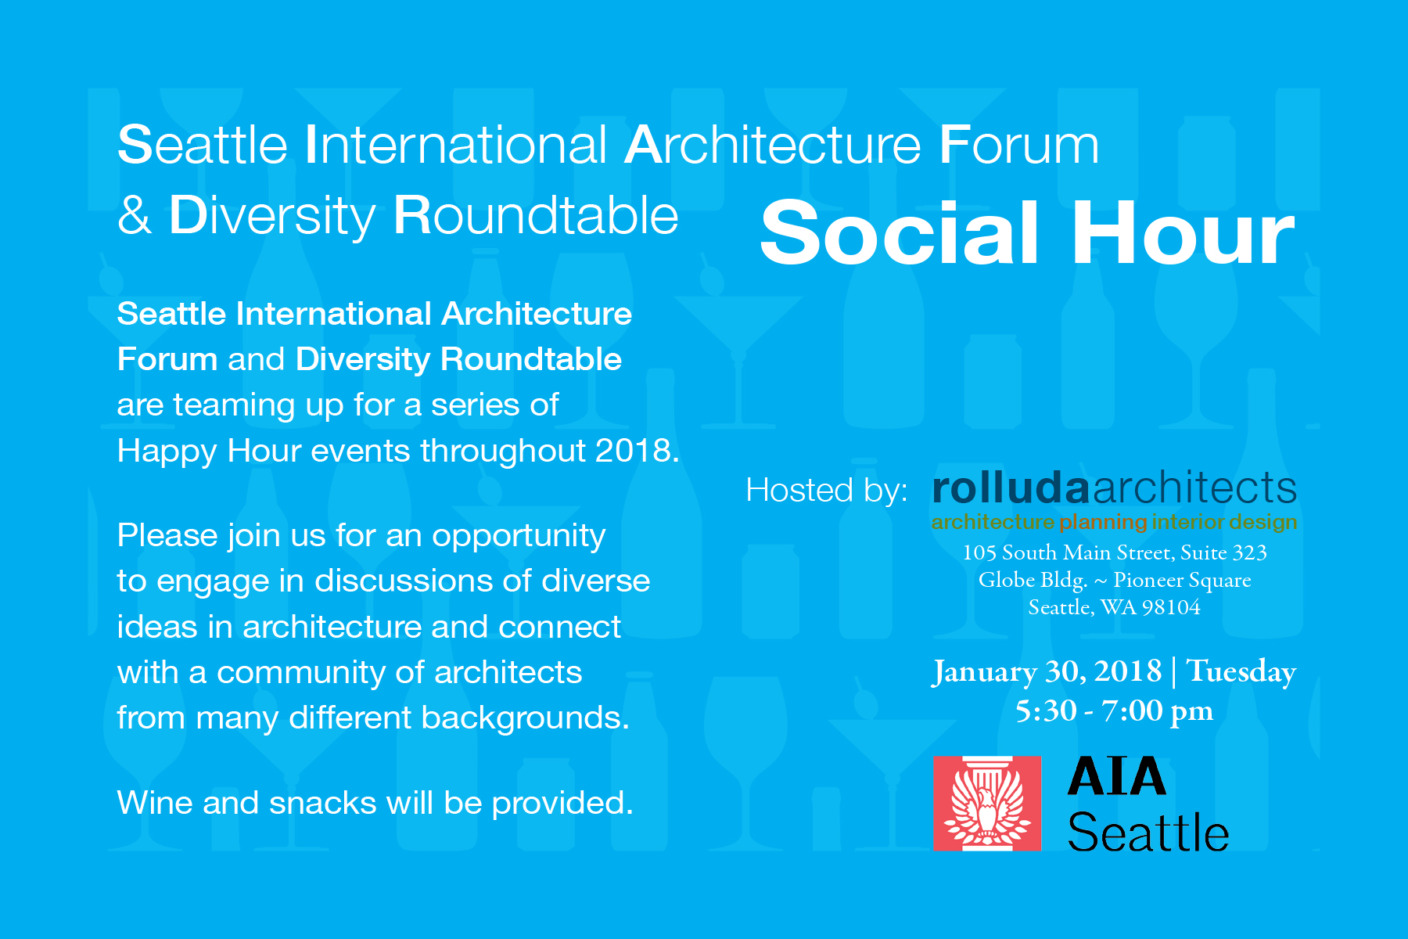 Seattle International Architecture Forum and Diversity Roundtable are teaming up for a series of Happy Hour events throughout 2018.